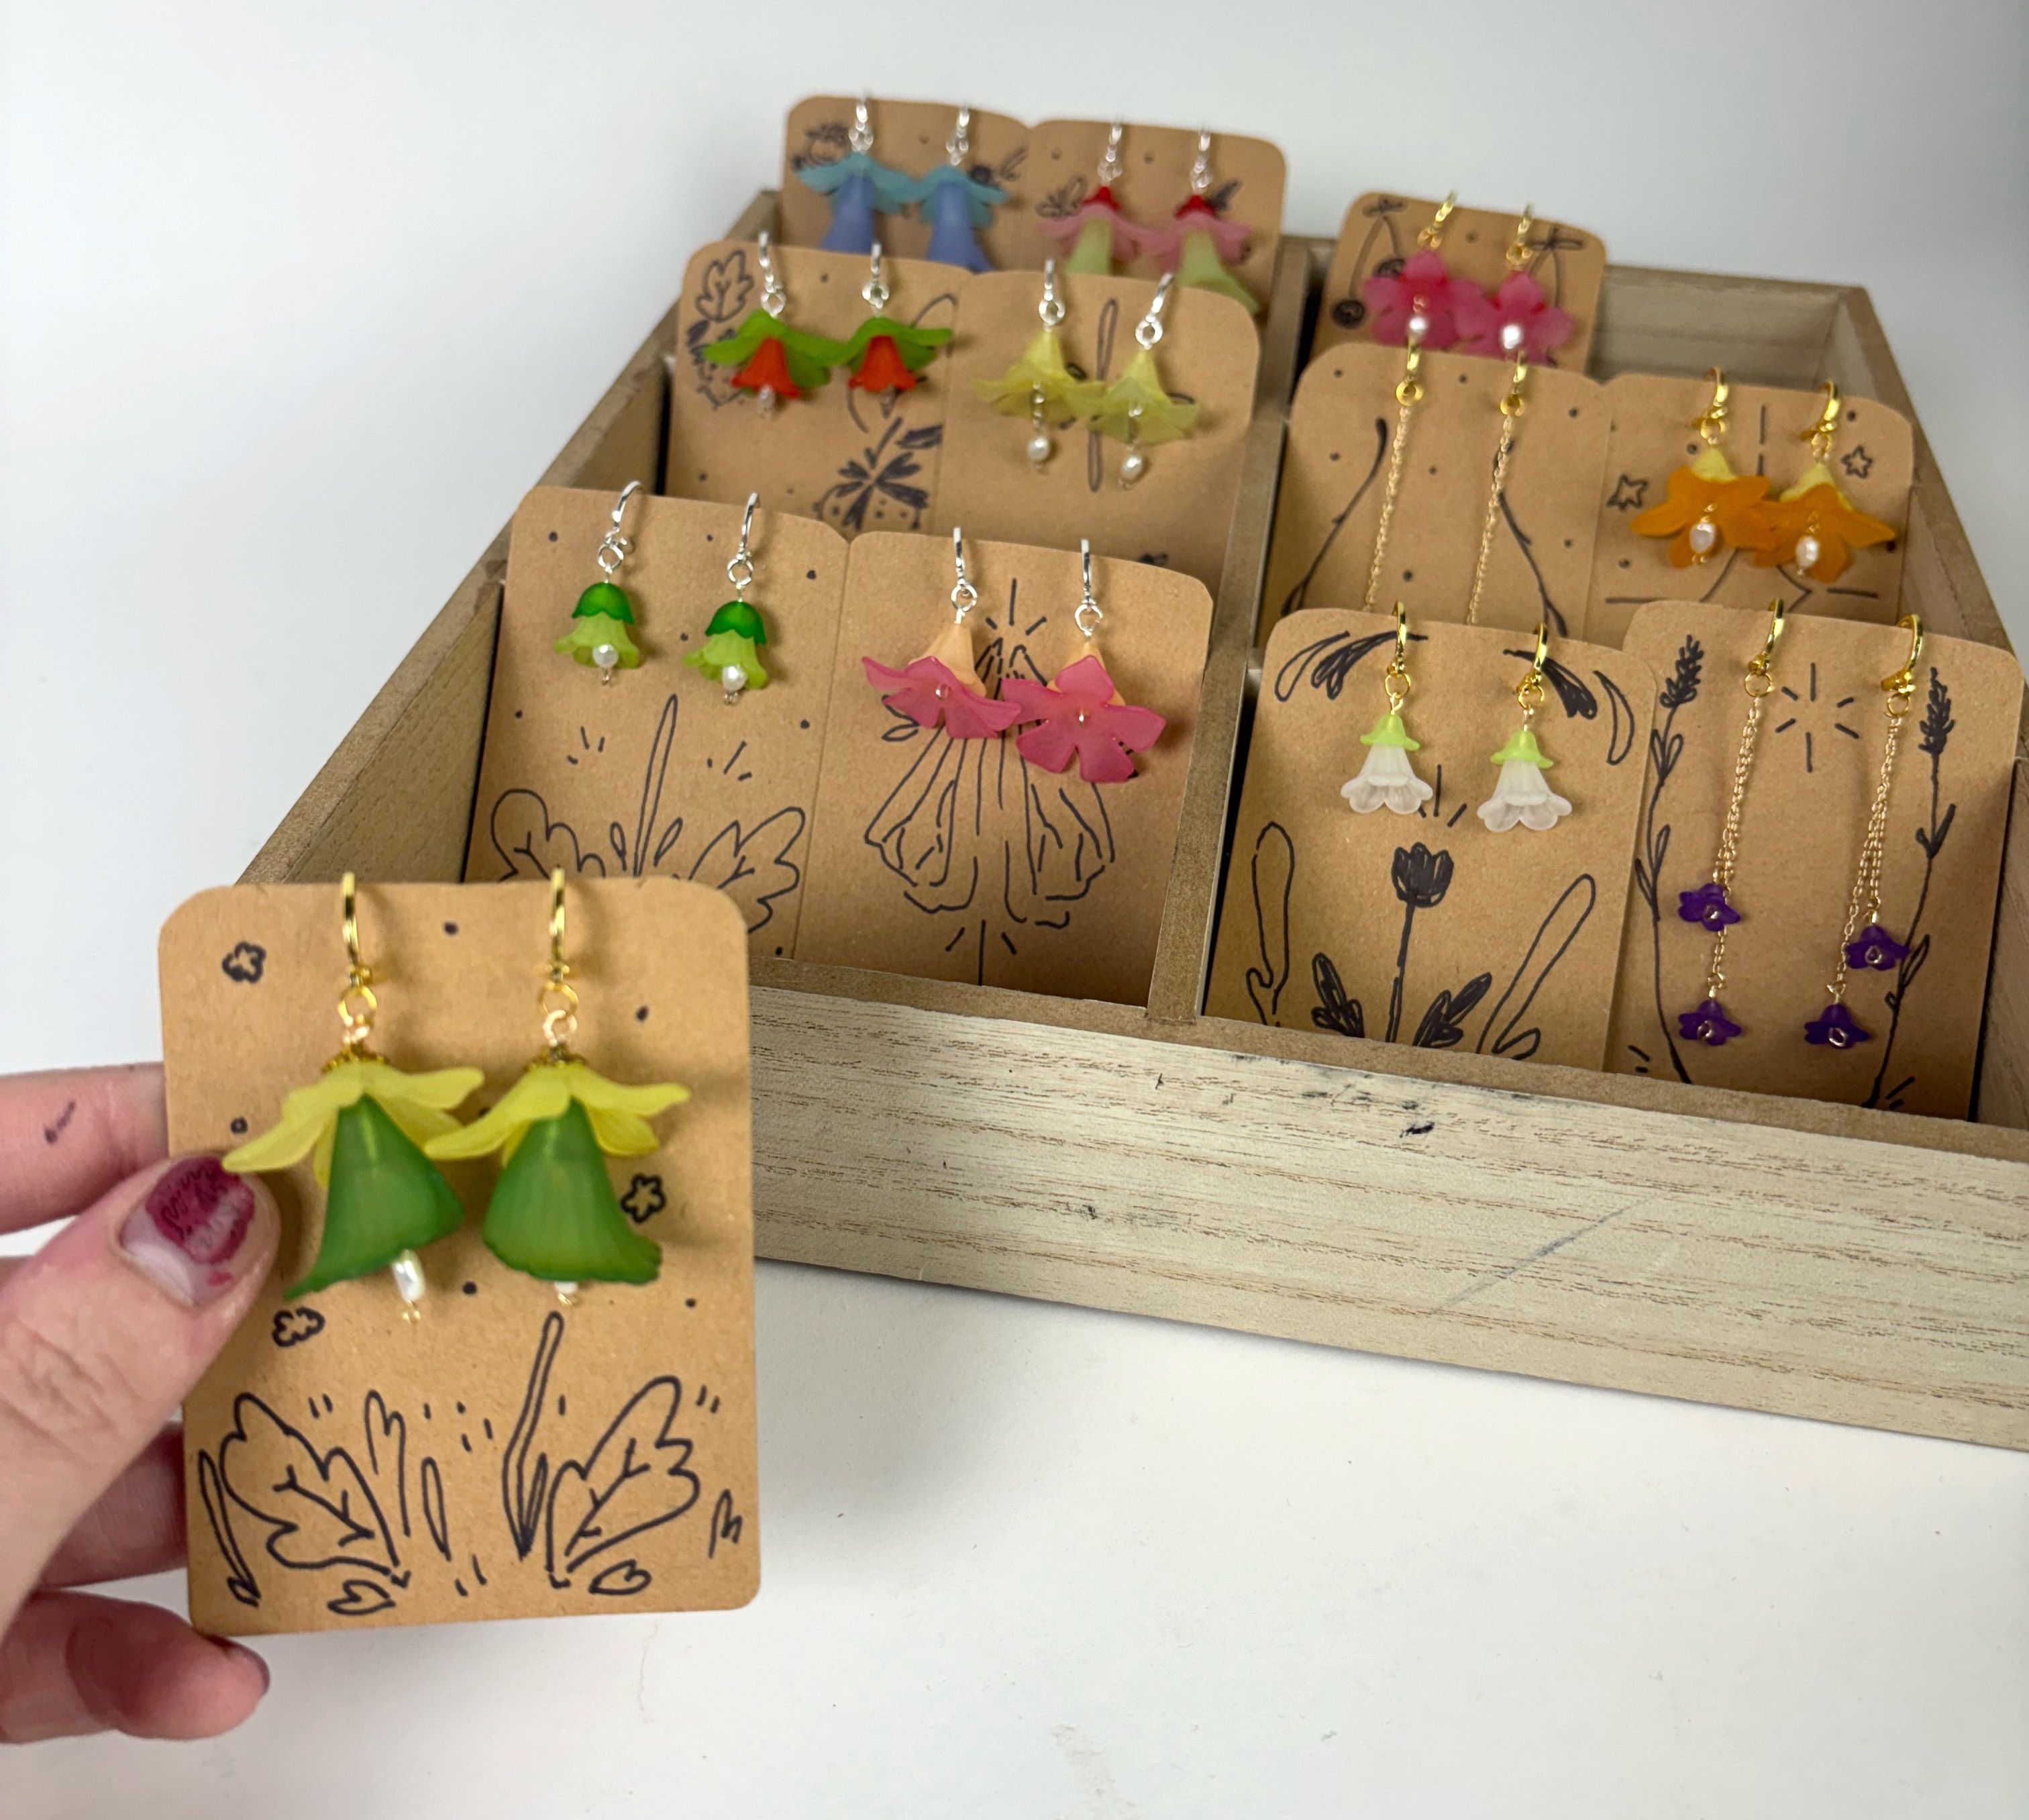 A display of earrings with floral beads.